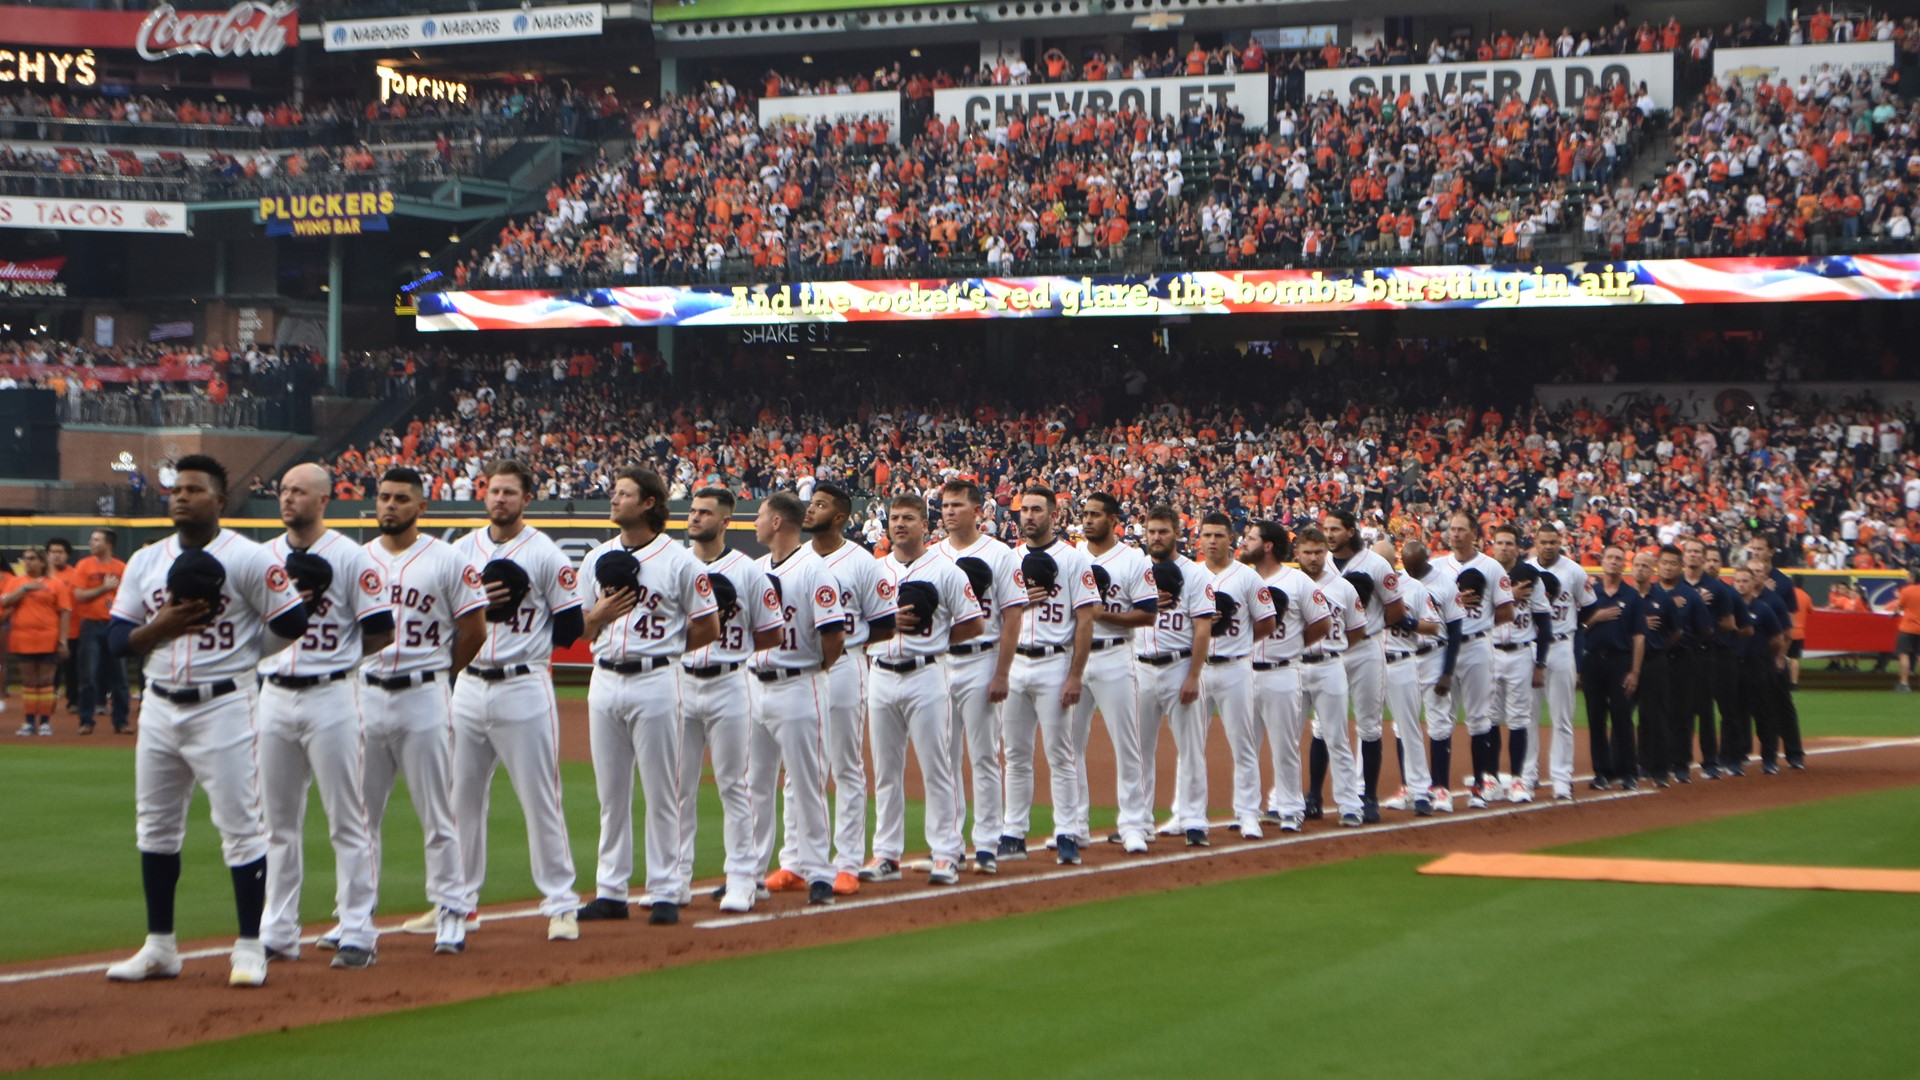 Photos Scenes from the Houston Astros' 2019 home opener